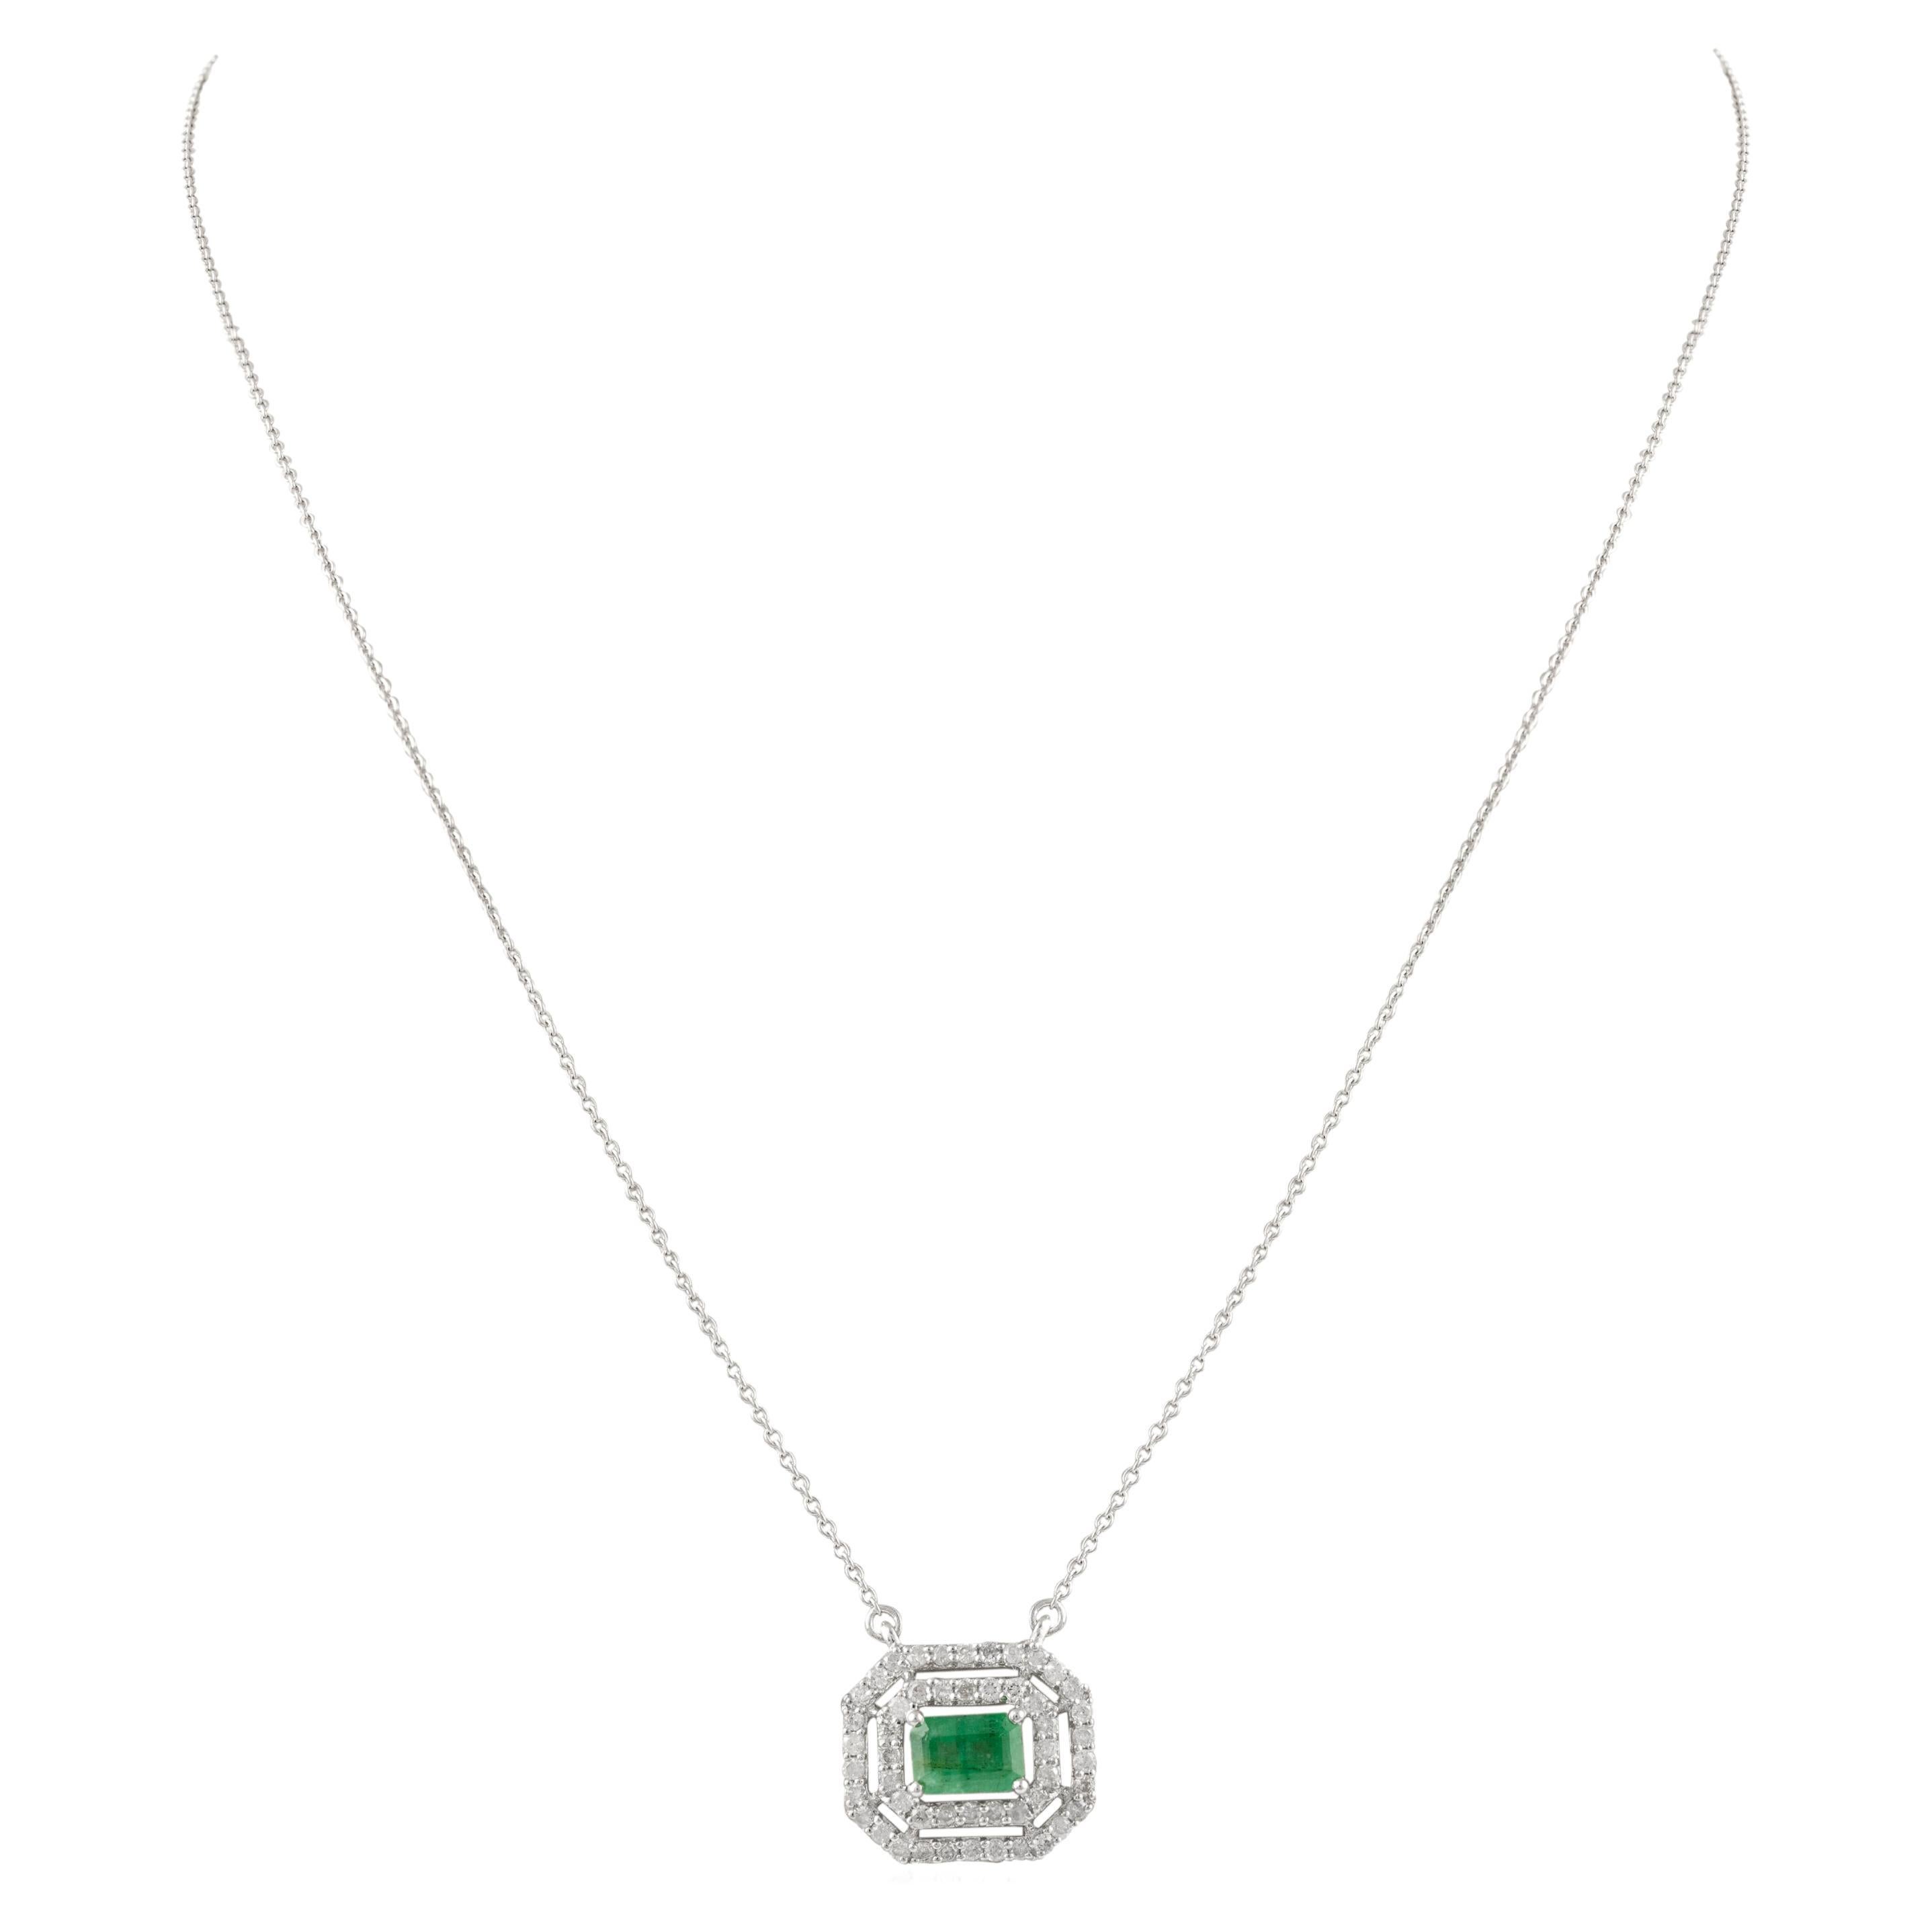 Brilliant Emerald Diamond Pendant Necklace with Chain in 14K Gold studded with octagon cut emerald and round cut diamonds. This stunning piece of jewelry instantly elevates a casual look or dressy outfit. 
Emerald enhances intellectual capacity of